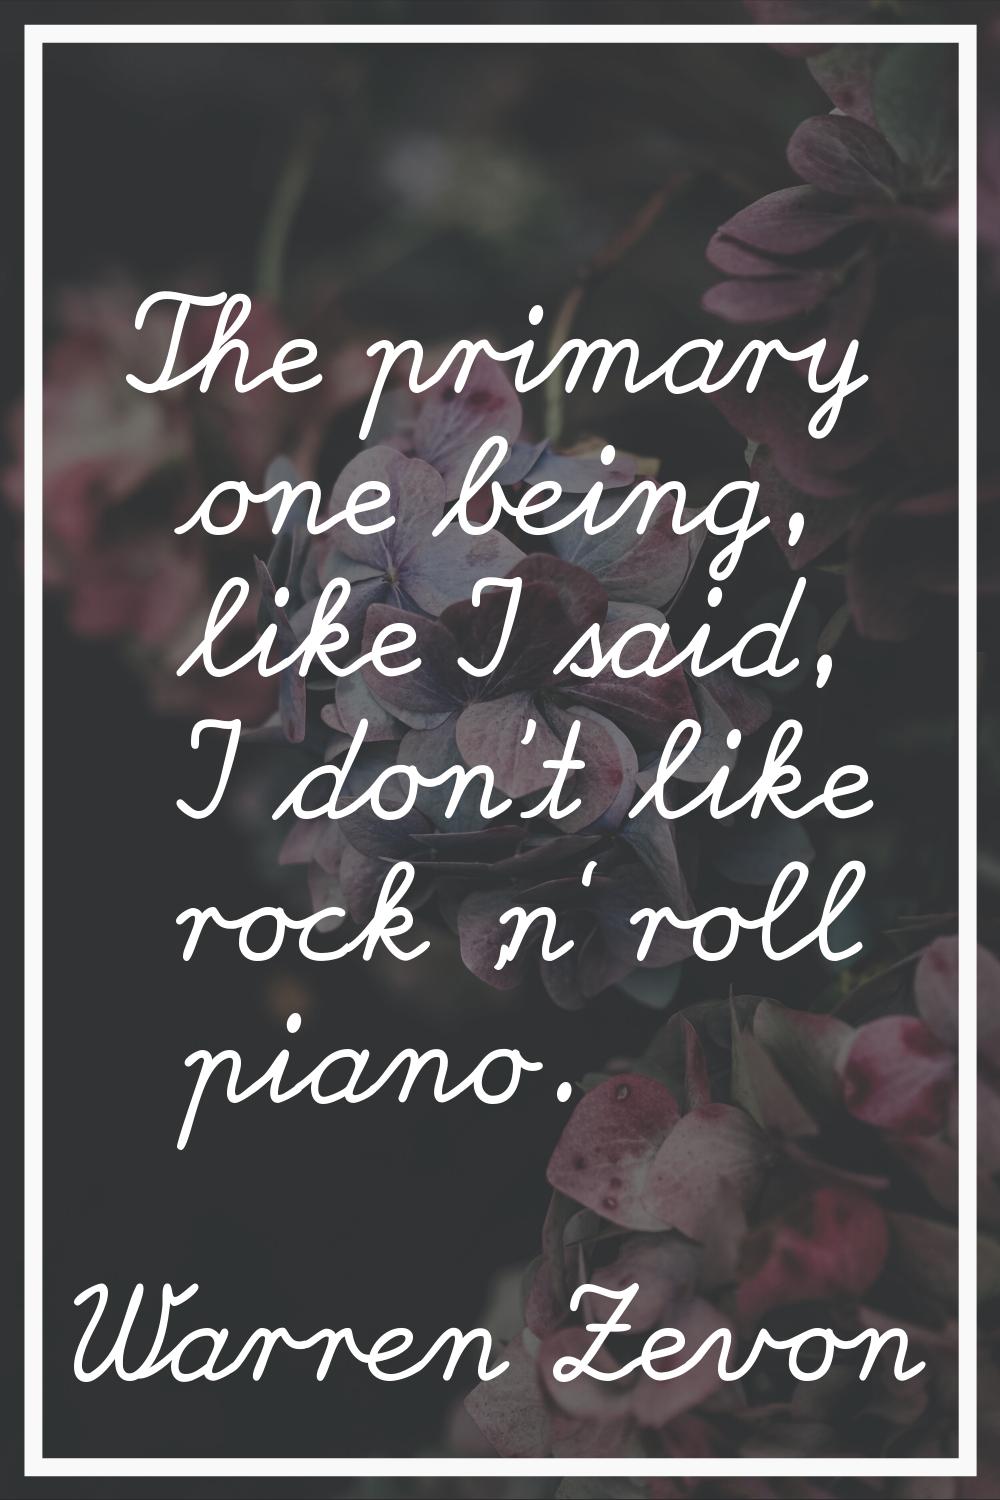 The primary one being, like I said, I don't like rock 'n' roll piano.